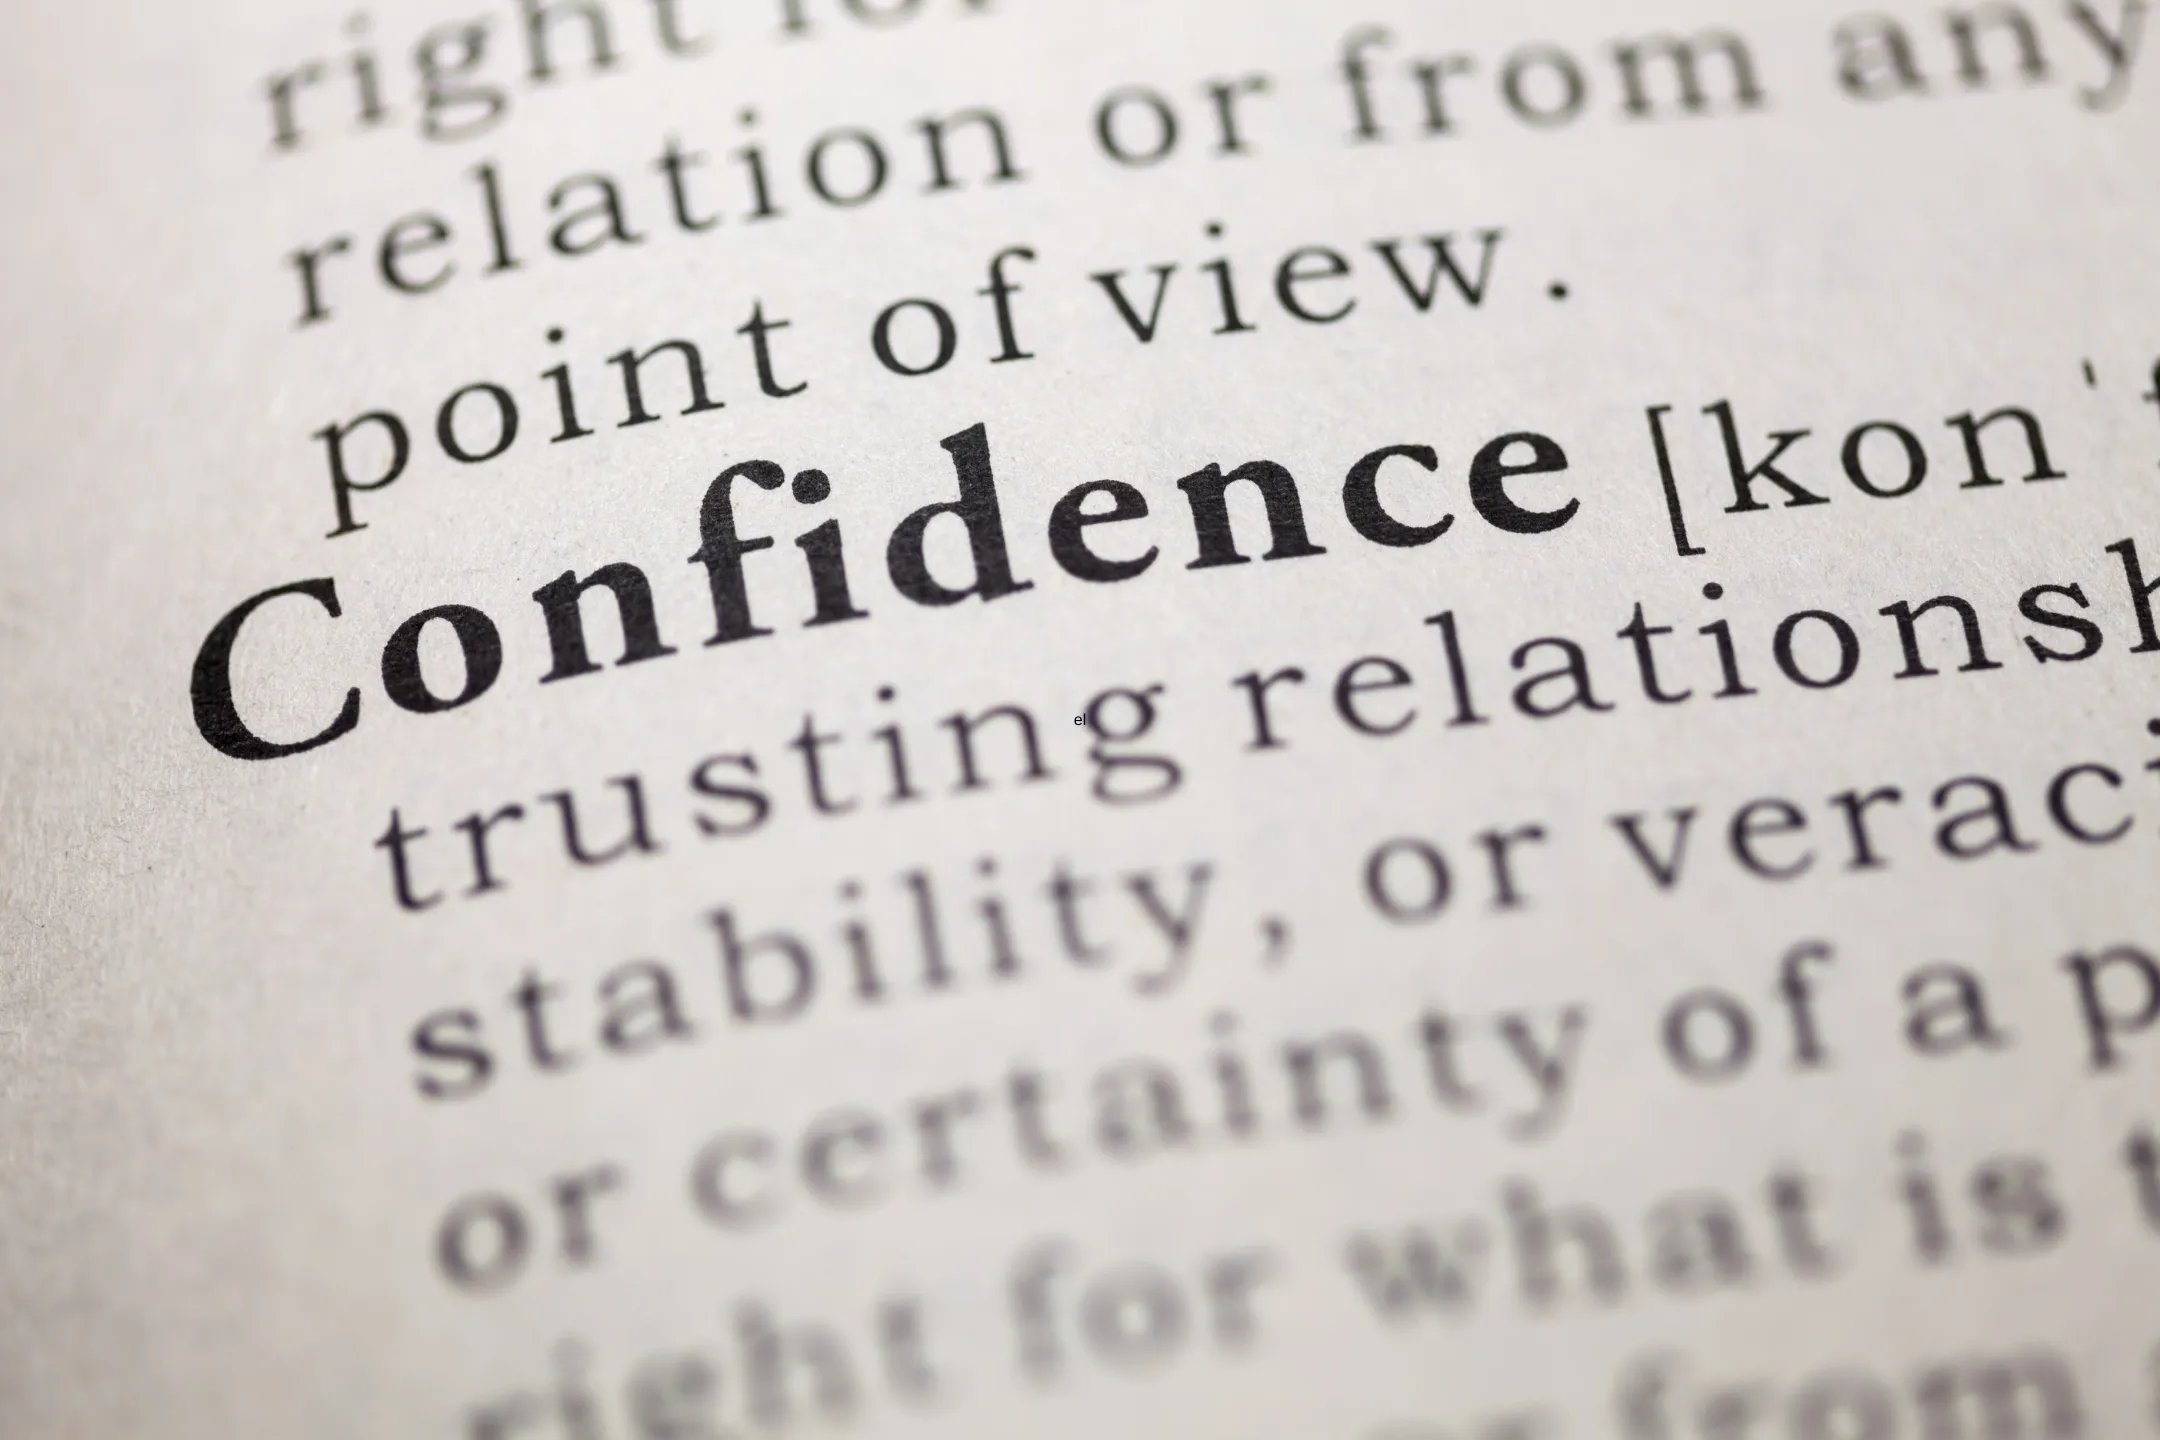 More Confidence, Less Risk